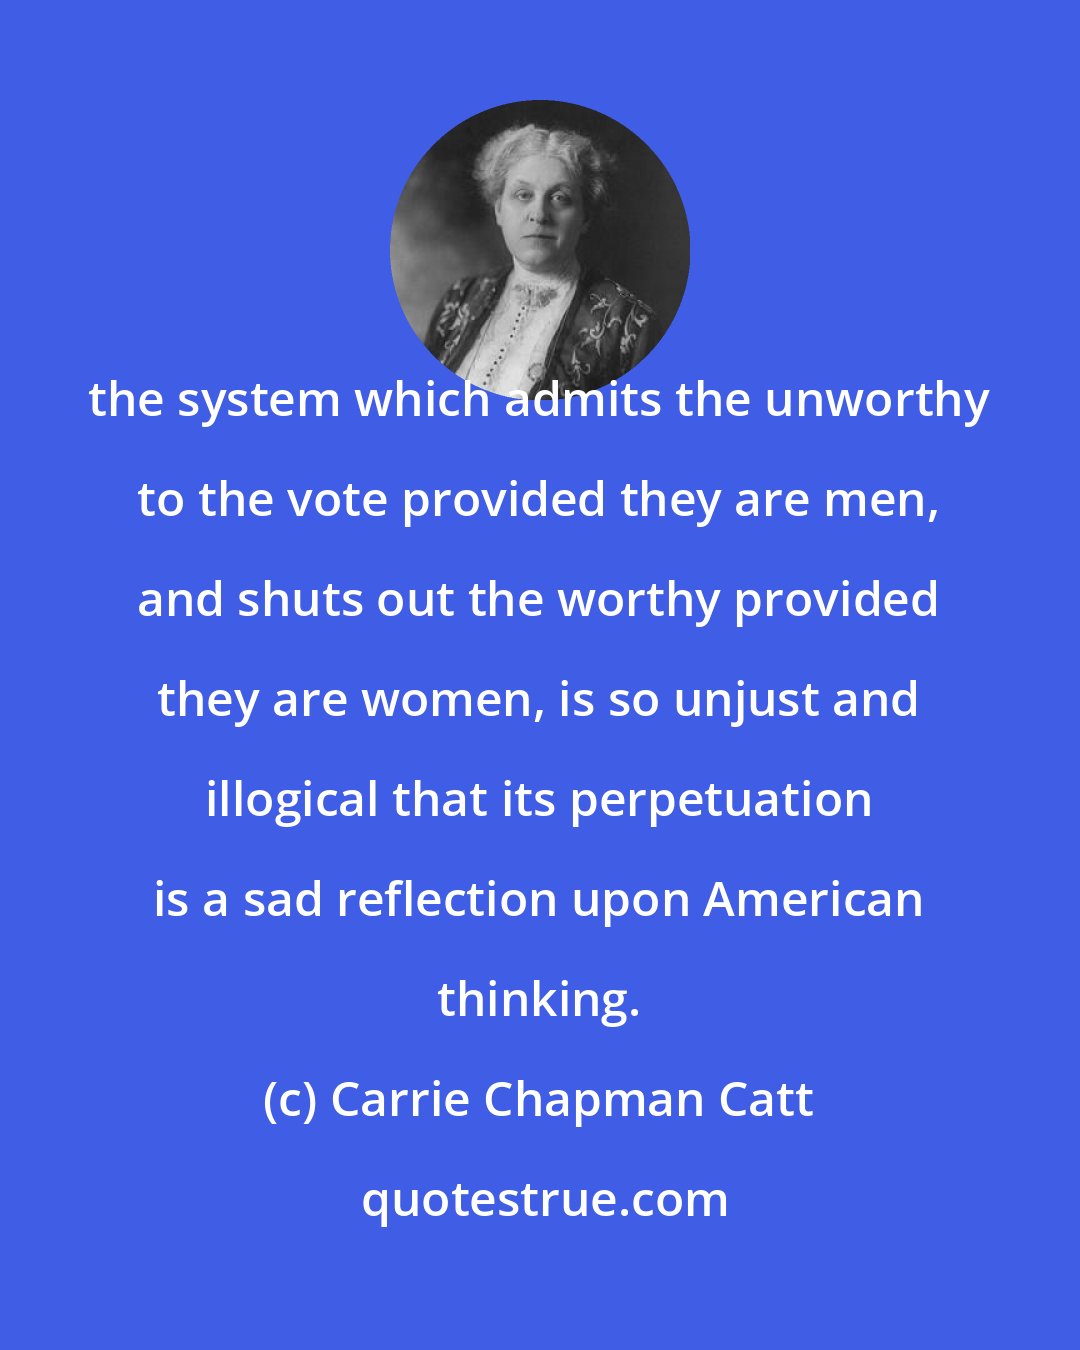 Carrie Chapman Catt: the system which admits the unworthy to the vote provided they are men, and shuts out the worthy provided they are women, is so unjust and illogical that its perpetuation is a sad reflection upon American thinking.